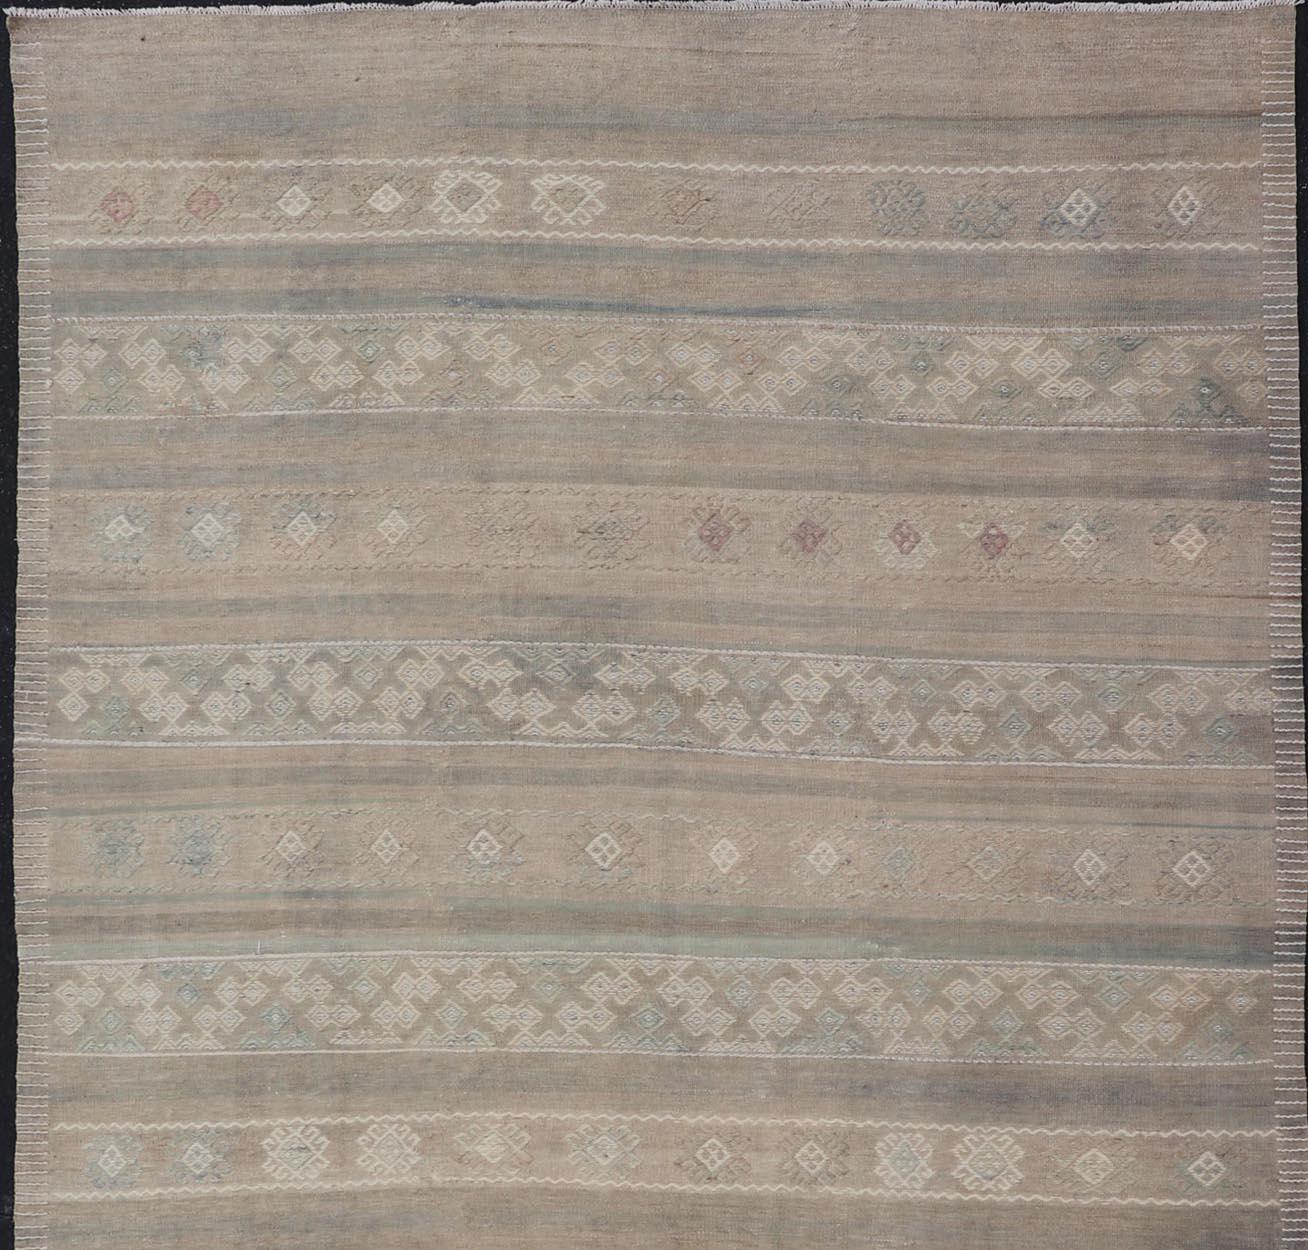 Hand-Woven Vintage Turkish Kilim with Stripes in Taupe, Green, Tan, Cream and Brown For Sale